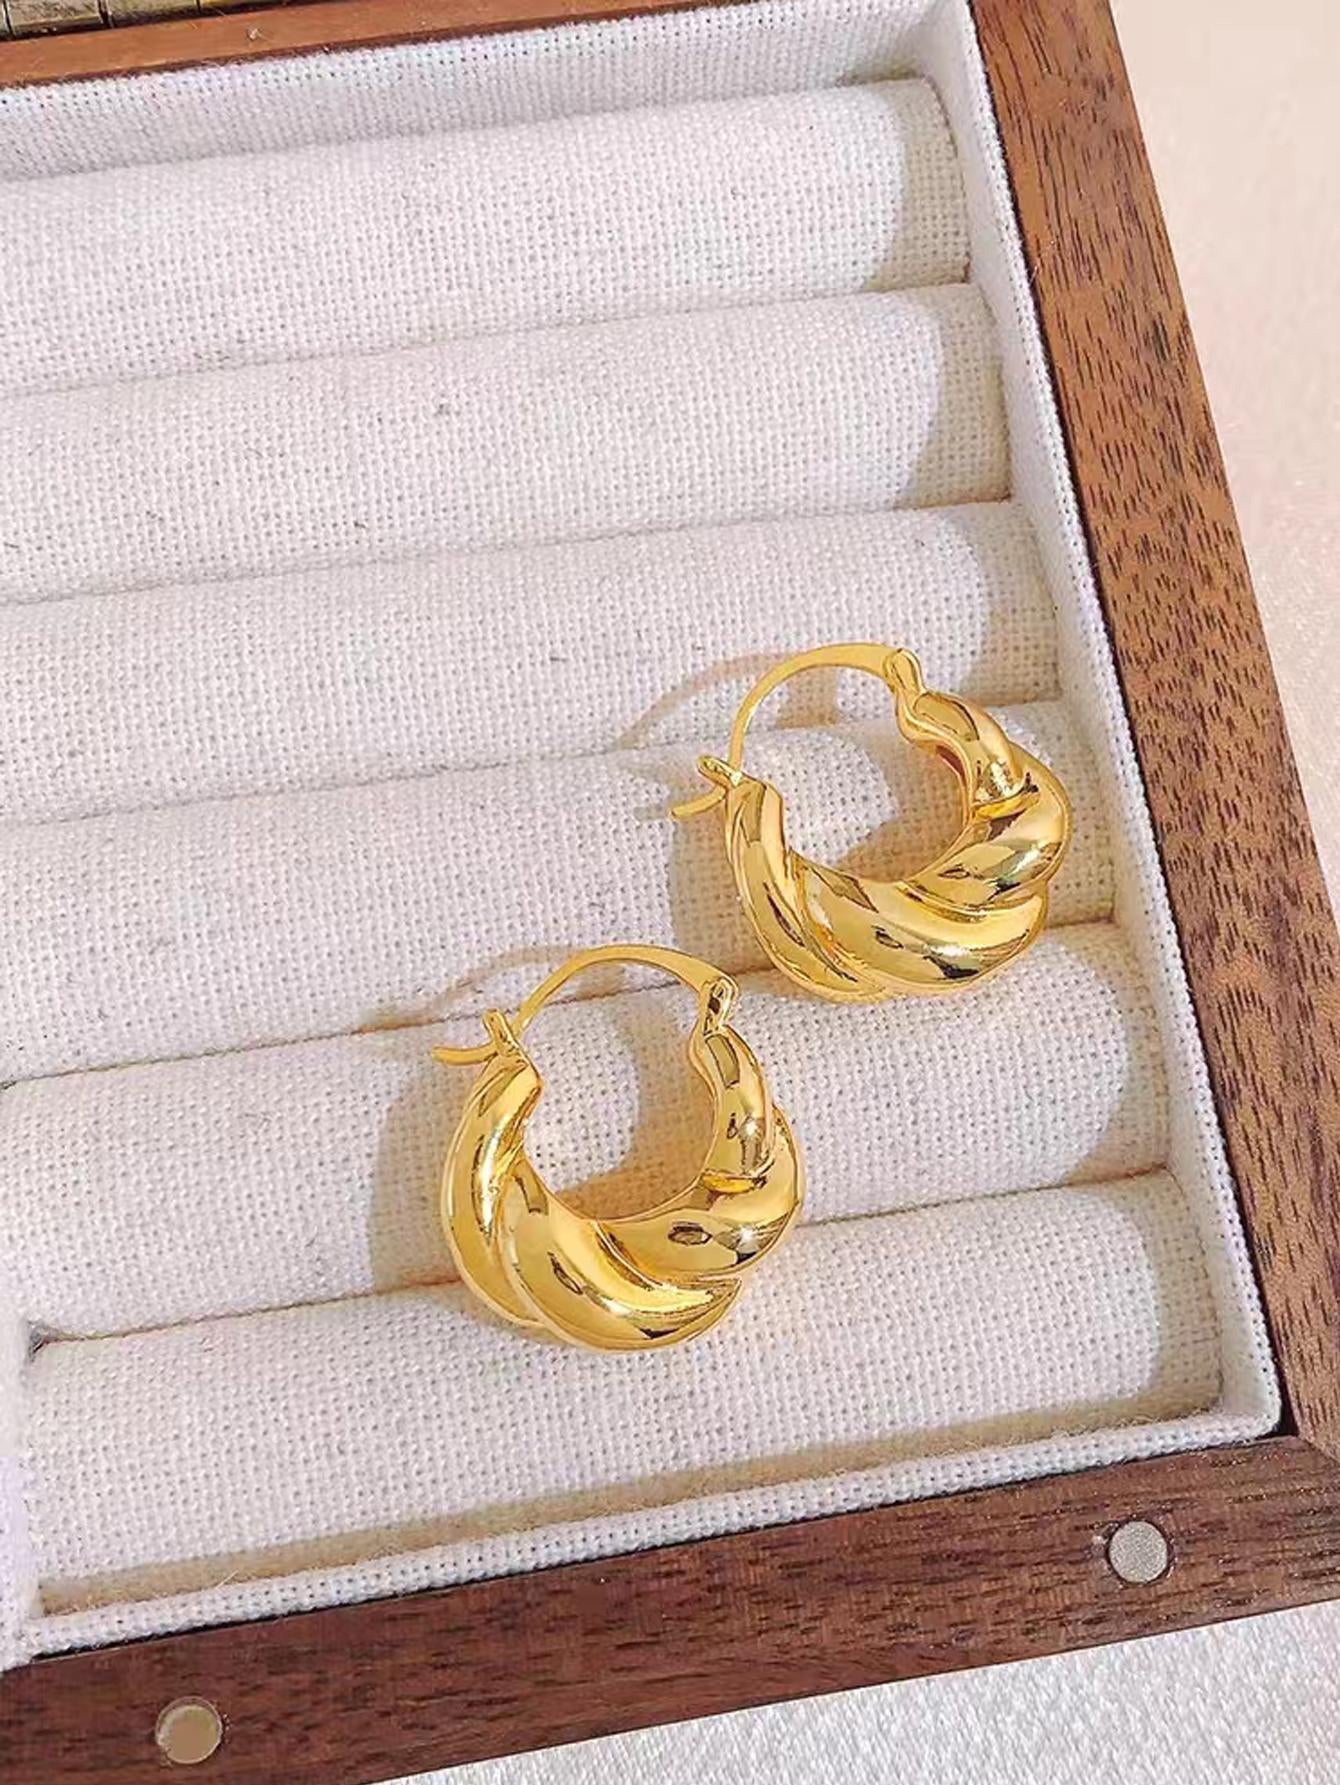 New Trendy Minimalist and Unique Design Horn Wrapped Hoop Earrings for Women – Personalized Ear Jewelry.